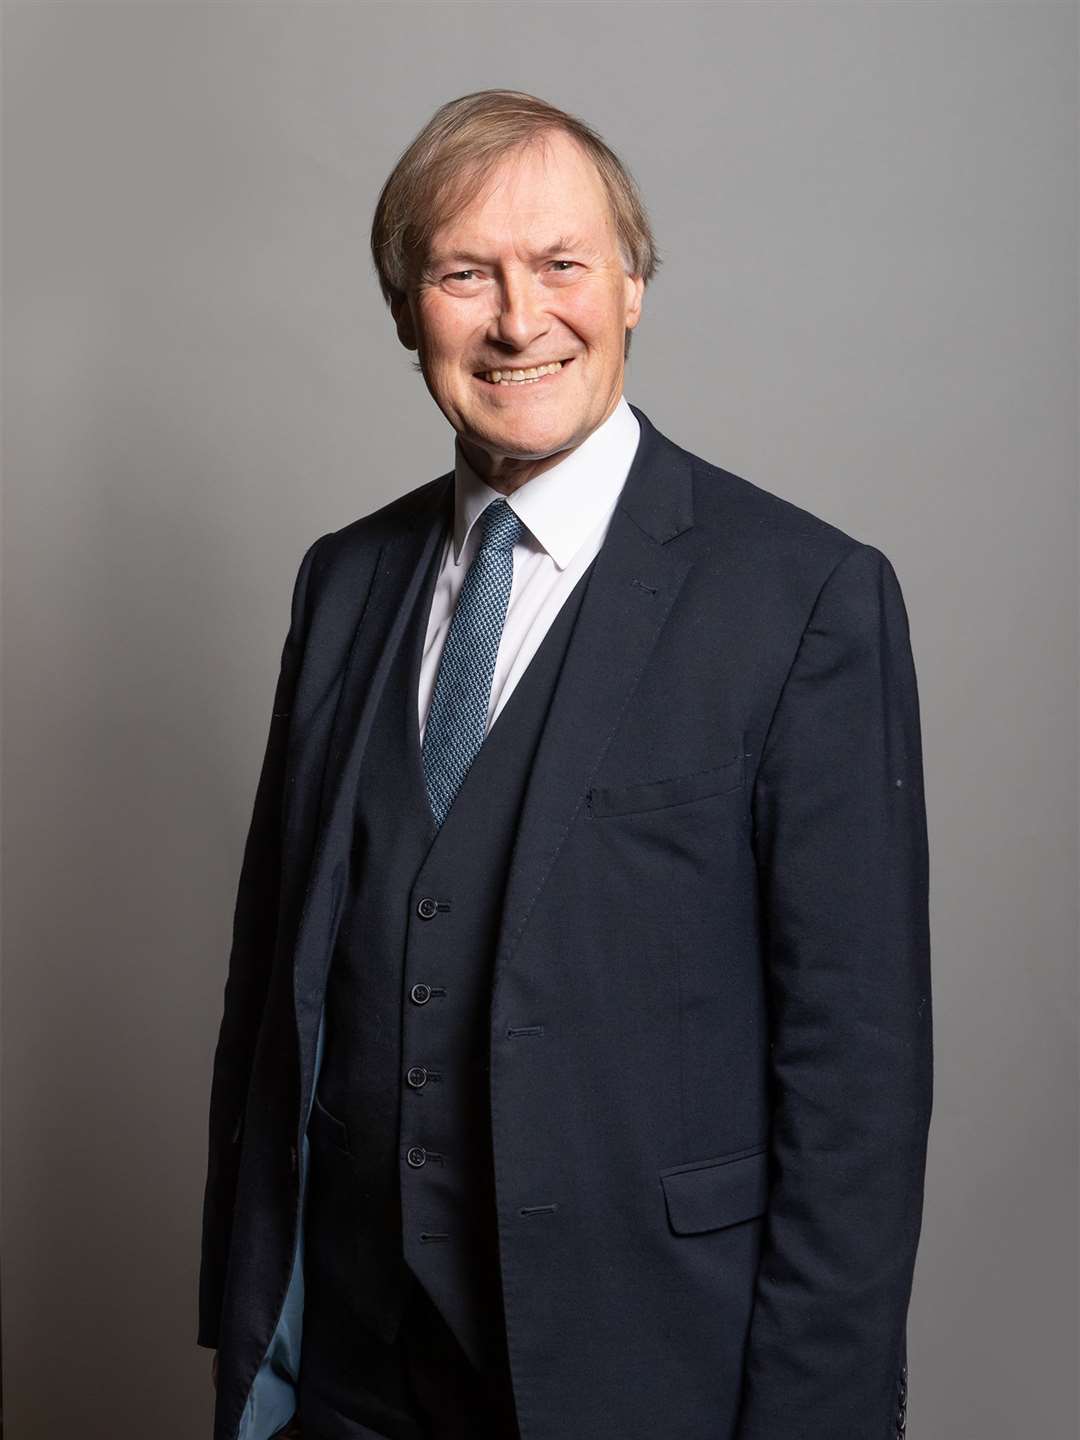 Sir David Amess had been in parliament for four decades.